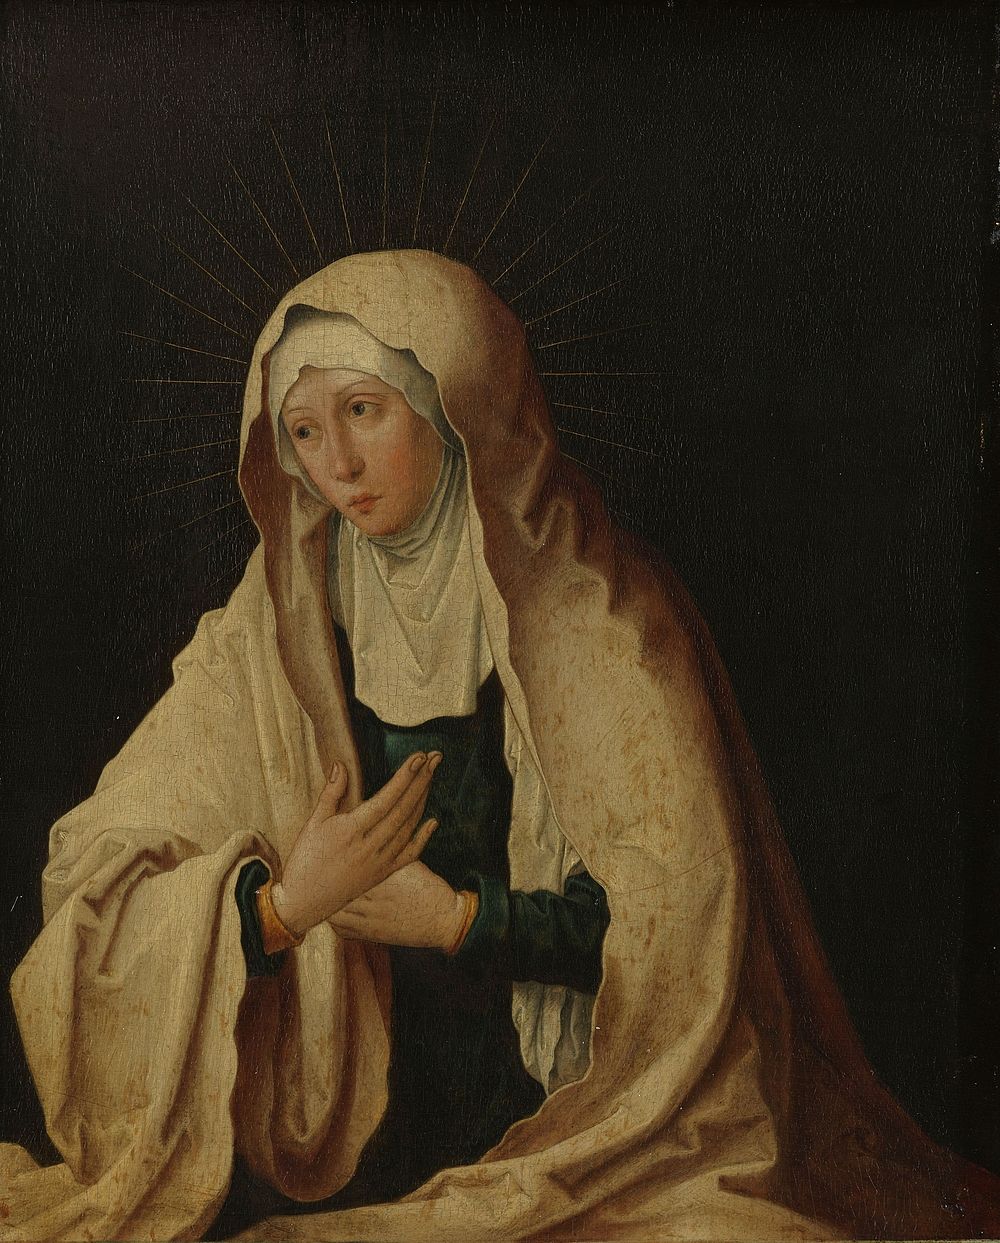 Virgin Mary (c. 1557 - c. 1600) by Lucas van Leyden and anonymous